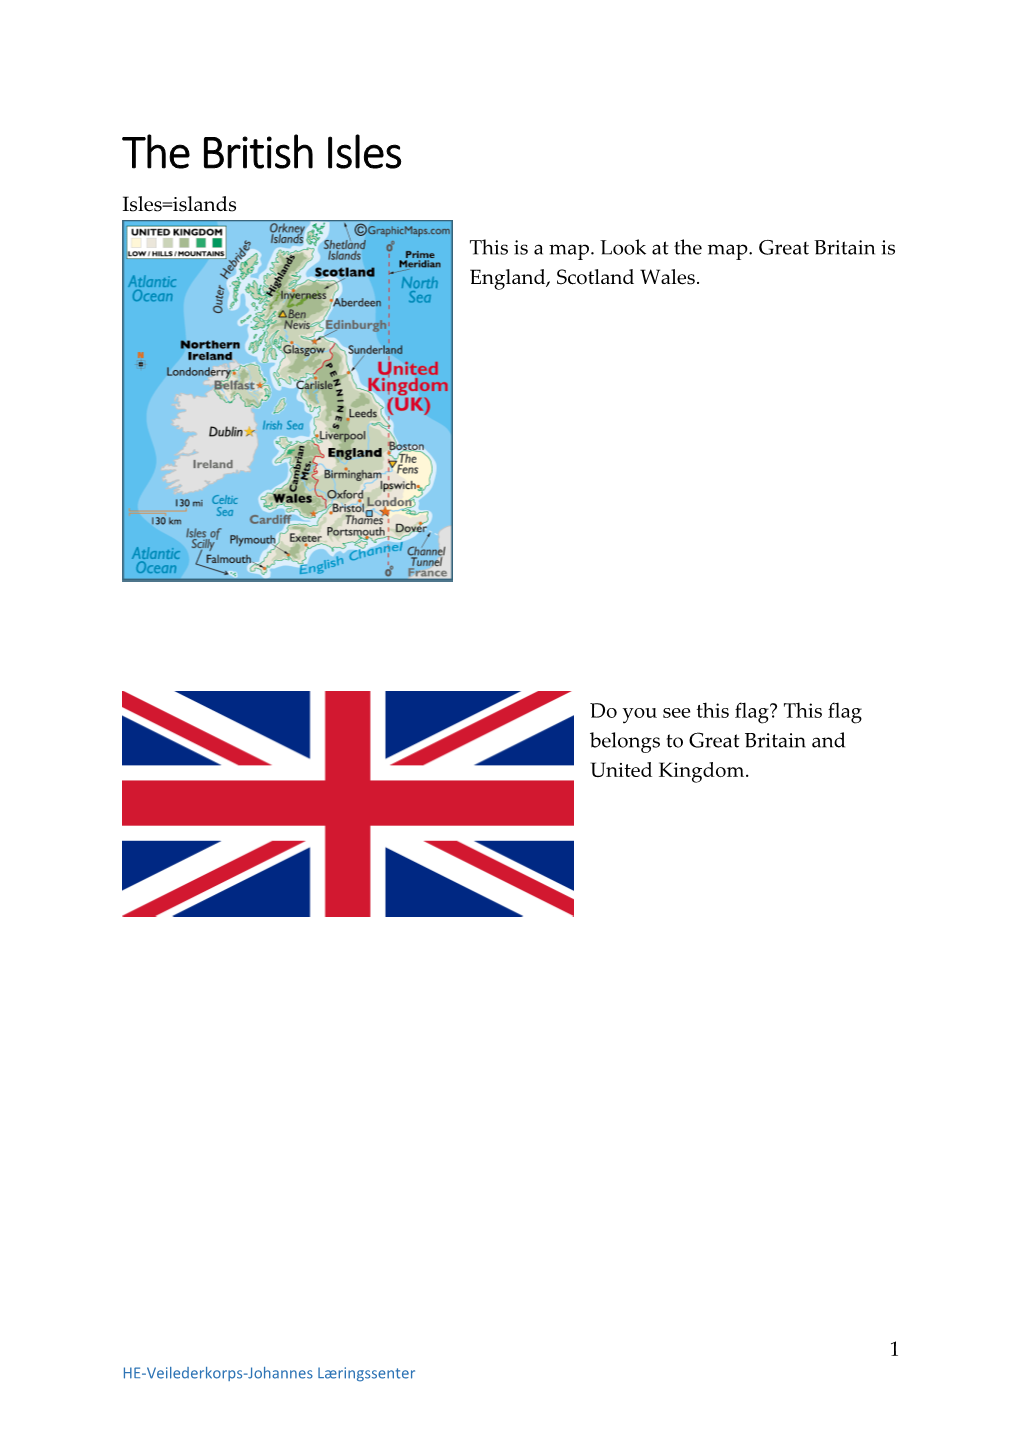 This Is a Map. Look at the Map. Great Britain Is England, Scotland Wales